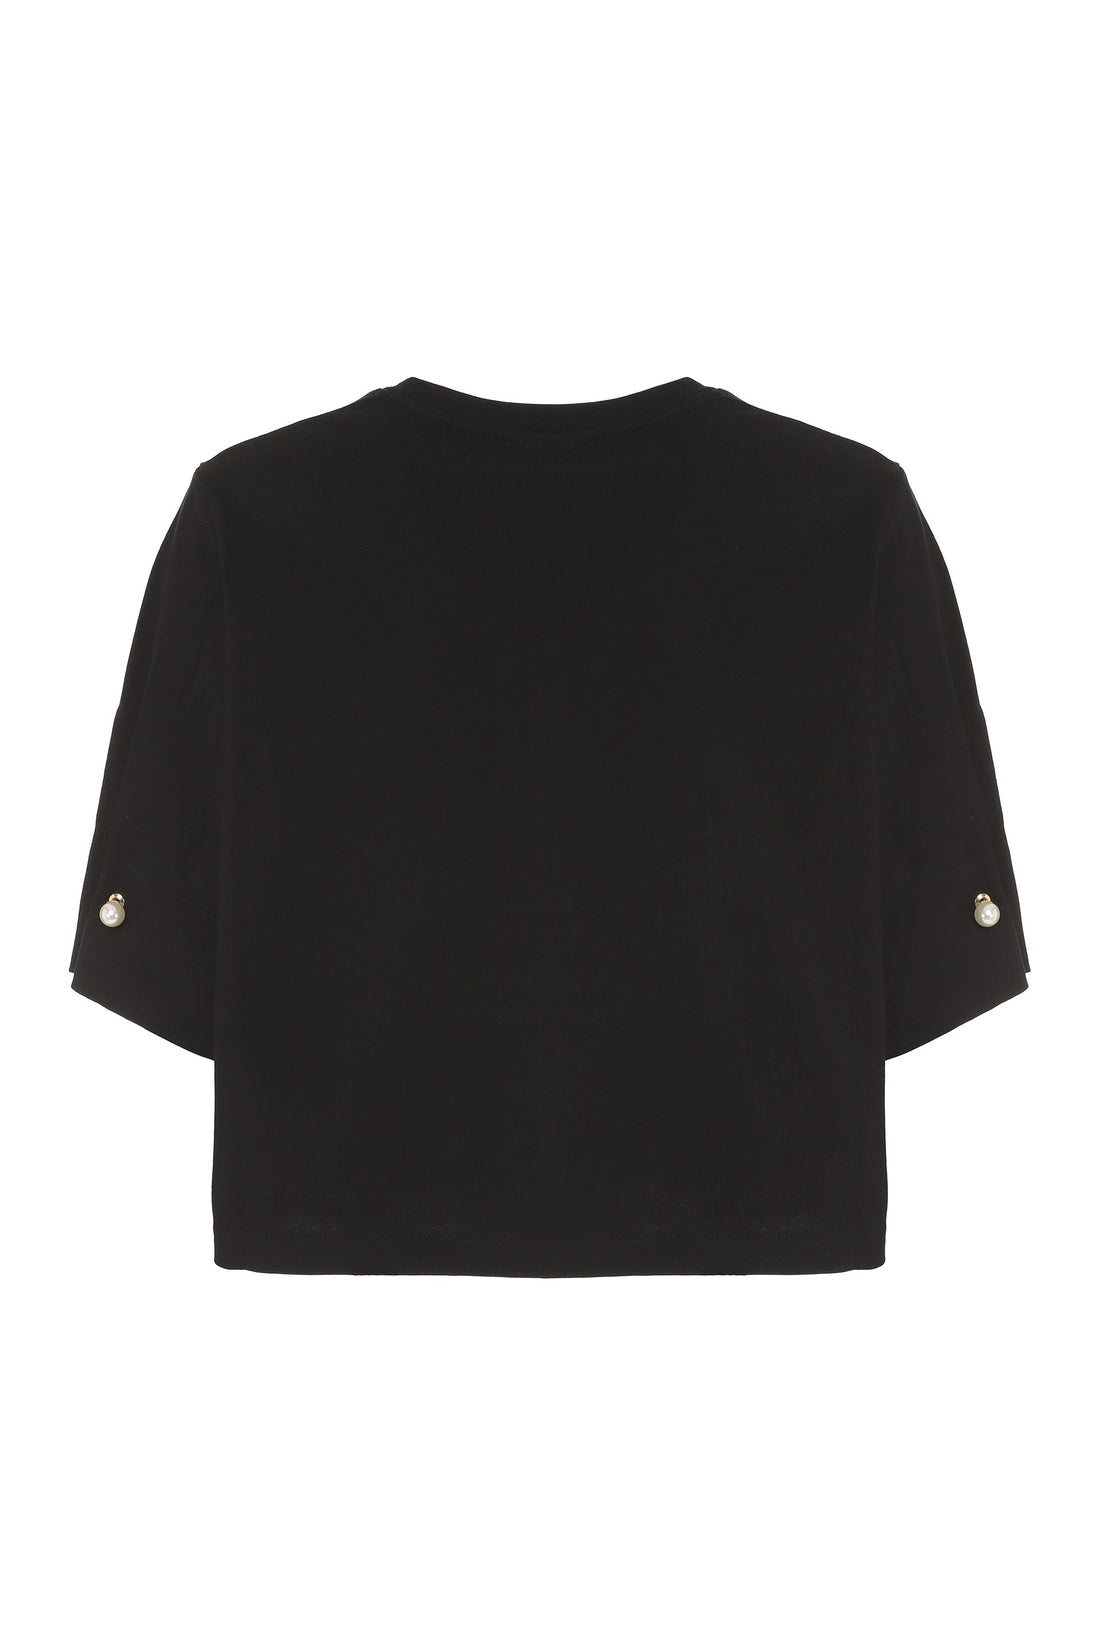 MOTHER OF PEARL-OUTLET-SALE-Monica cropped t-shirt-ARCHIVIST